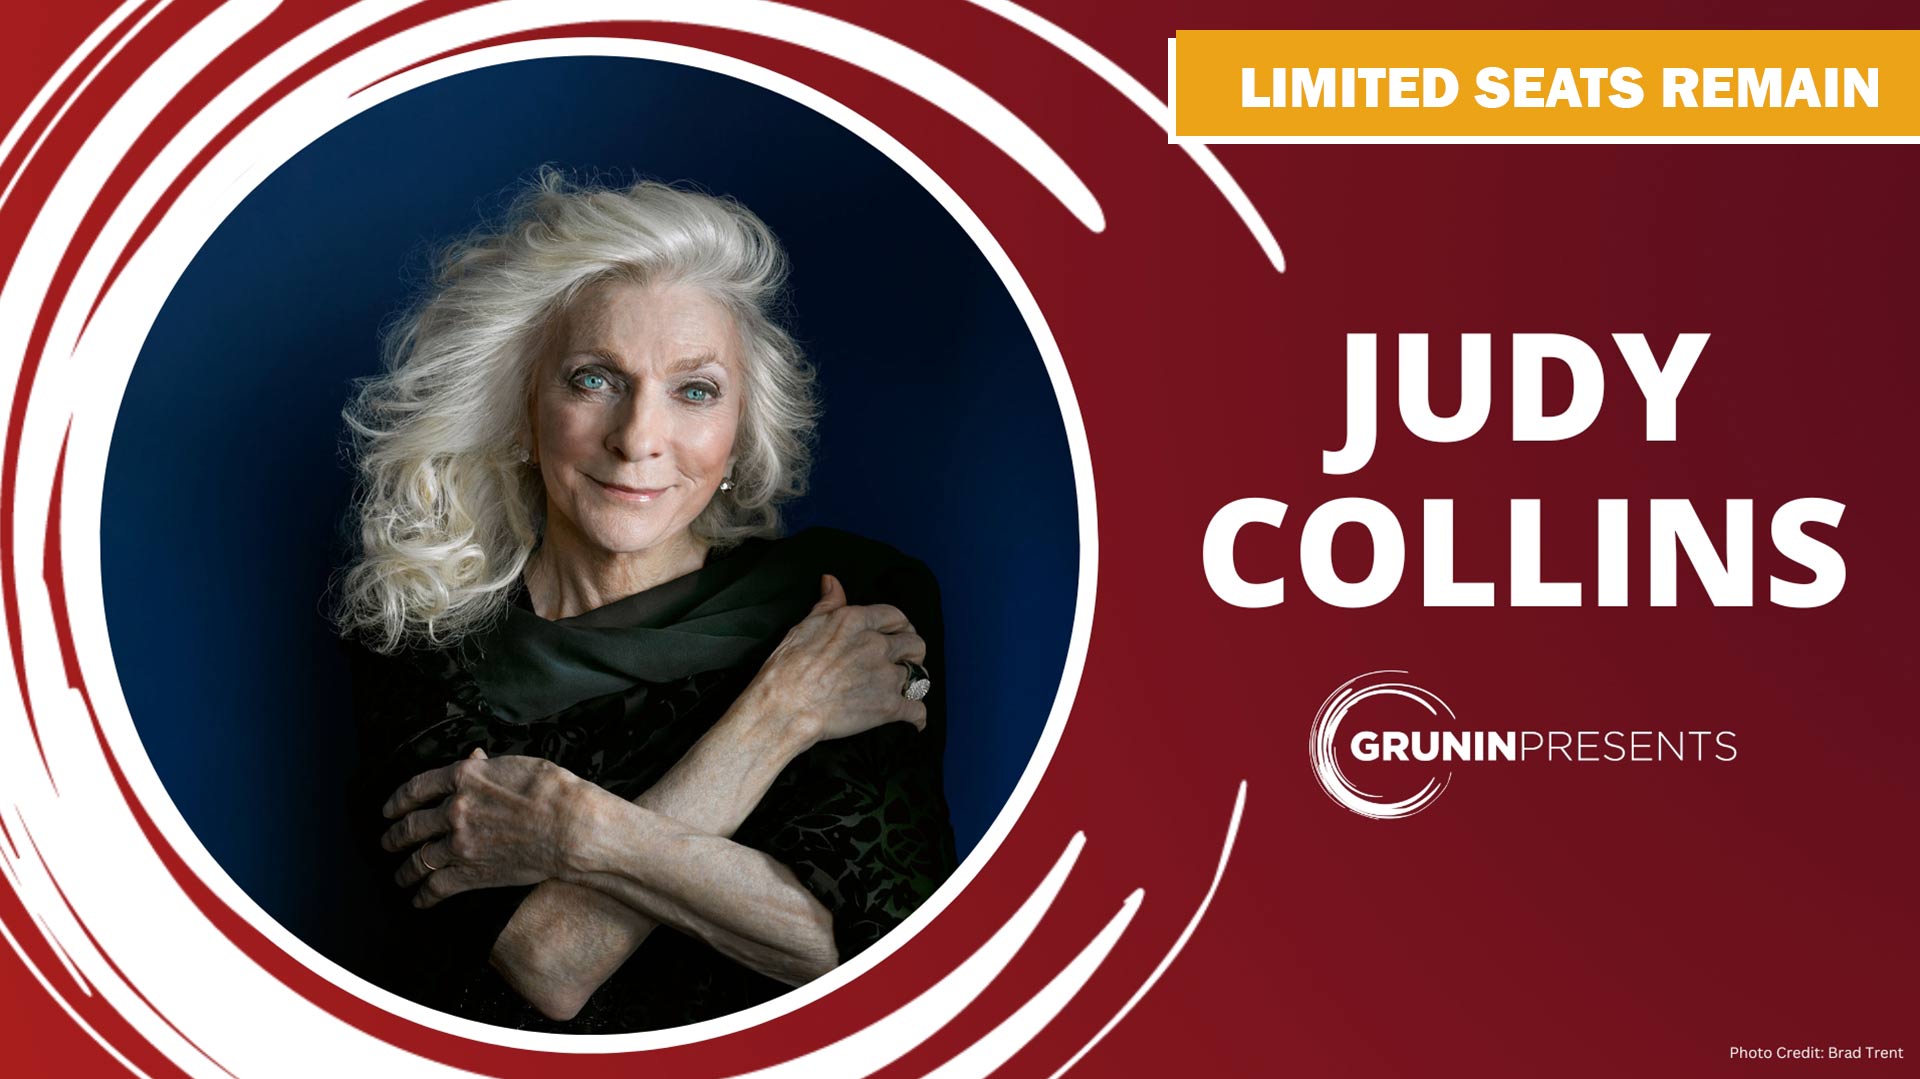 Judy Collins - Limited Seats Remain